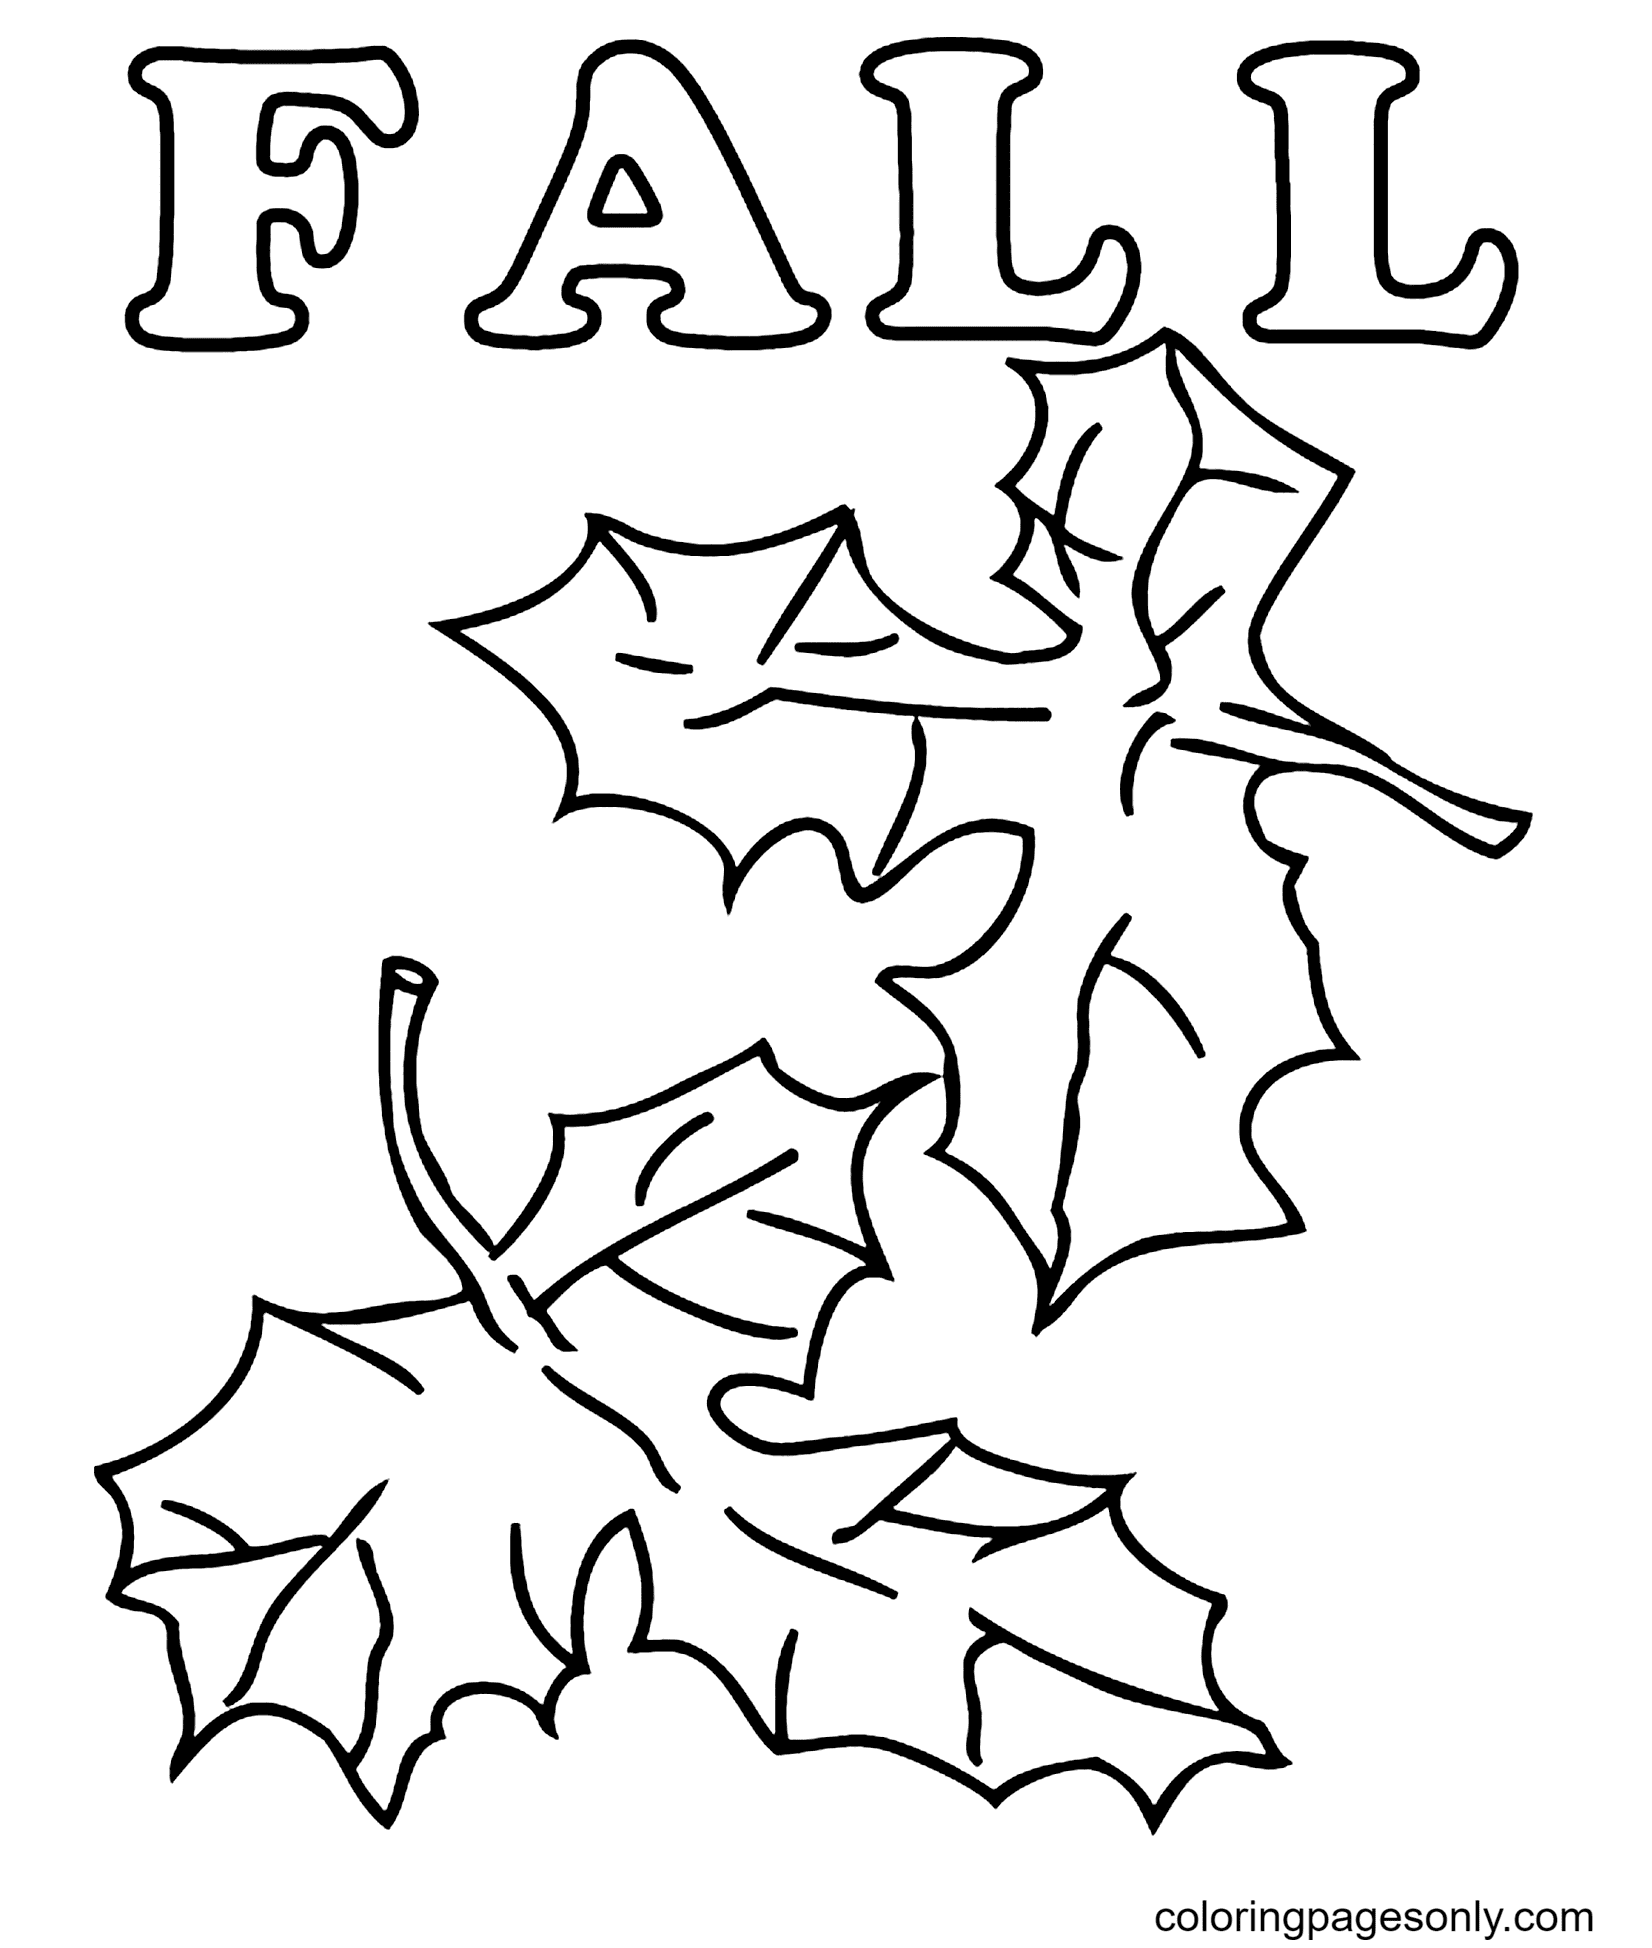 Free Printable Autumn Leaves from Autumn Leaves